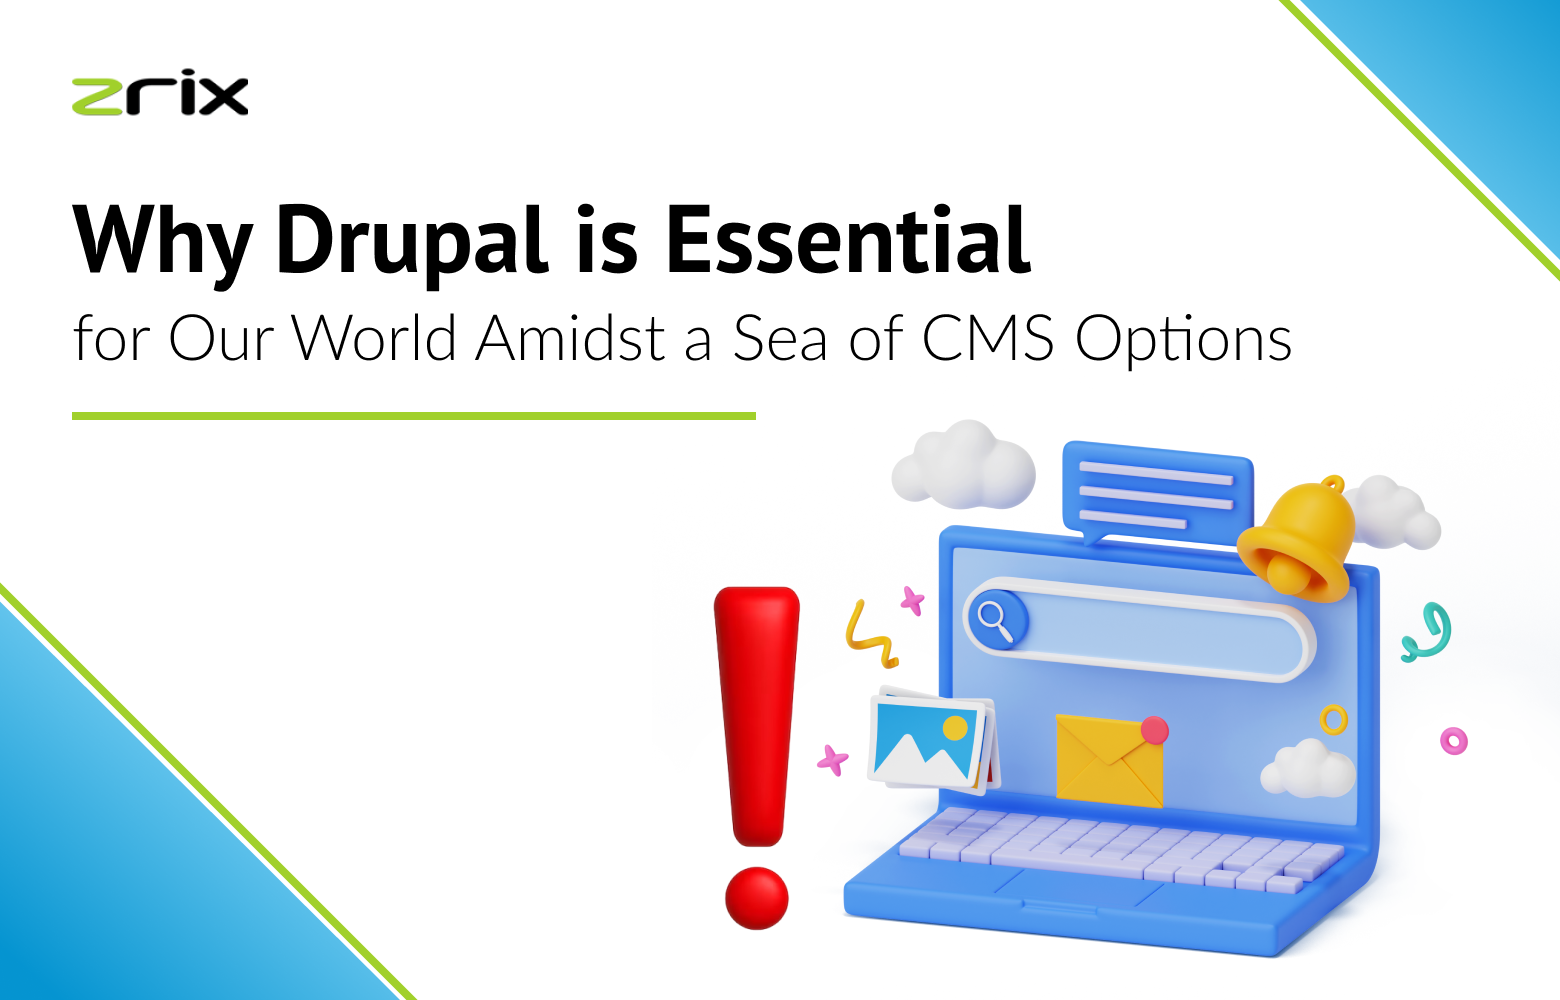 Why Drupal is Essential for Our World Amidst a Sea of CMS Options